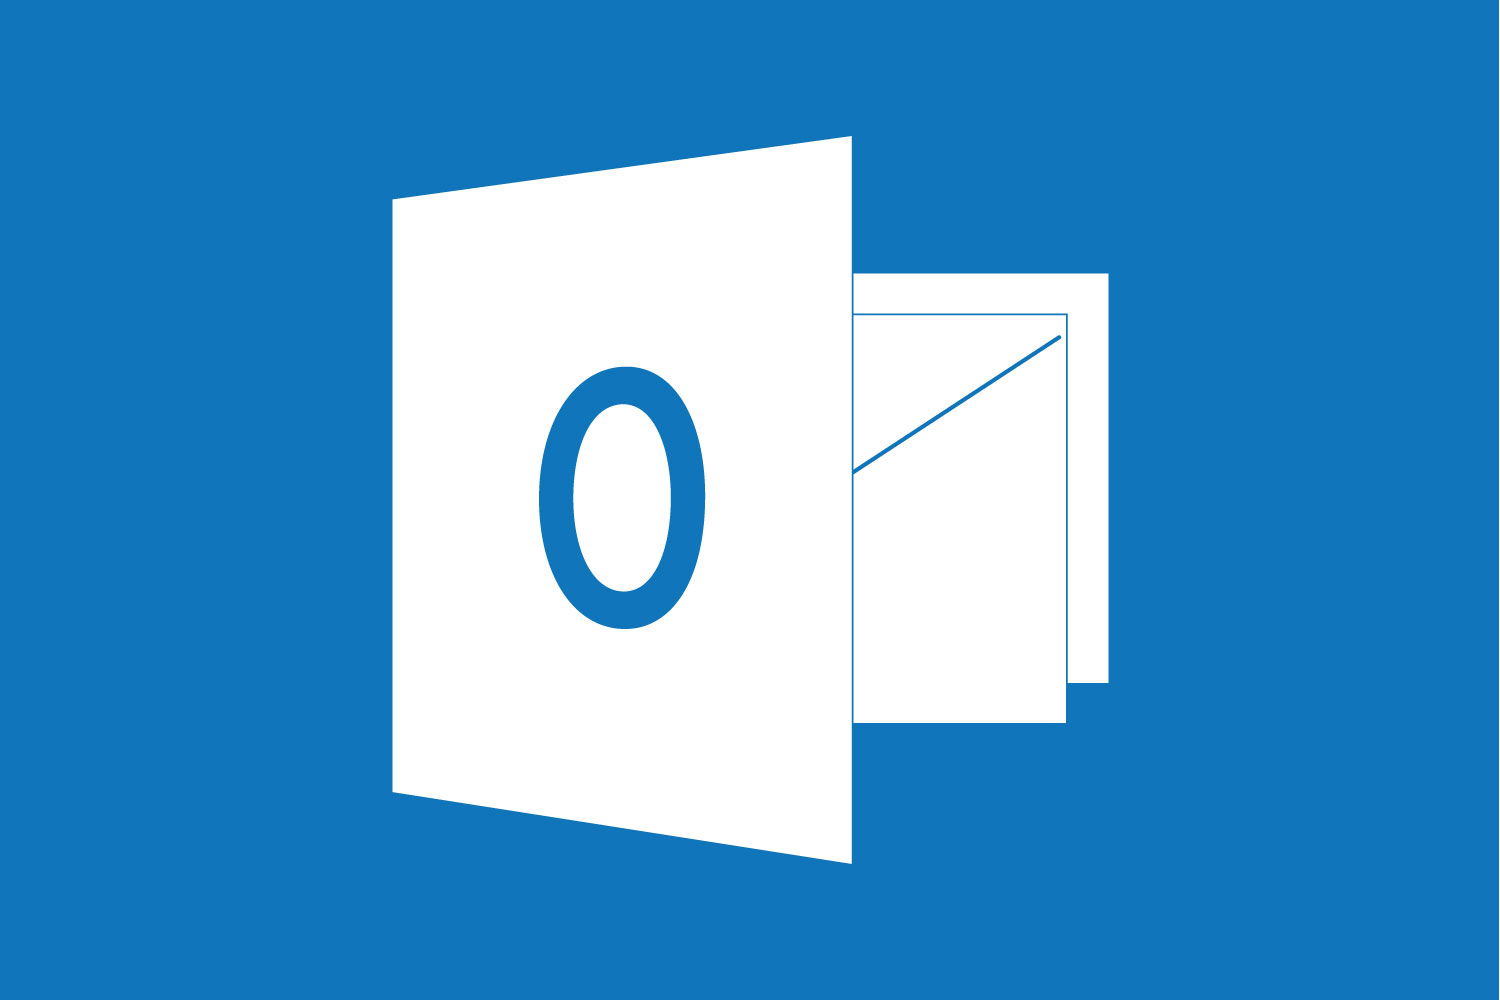 microsoft outlook office 360